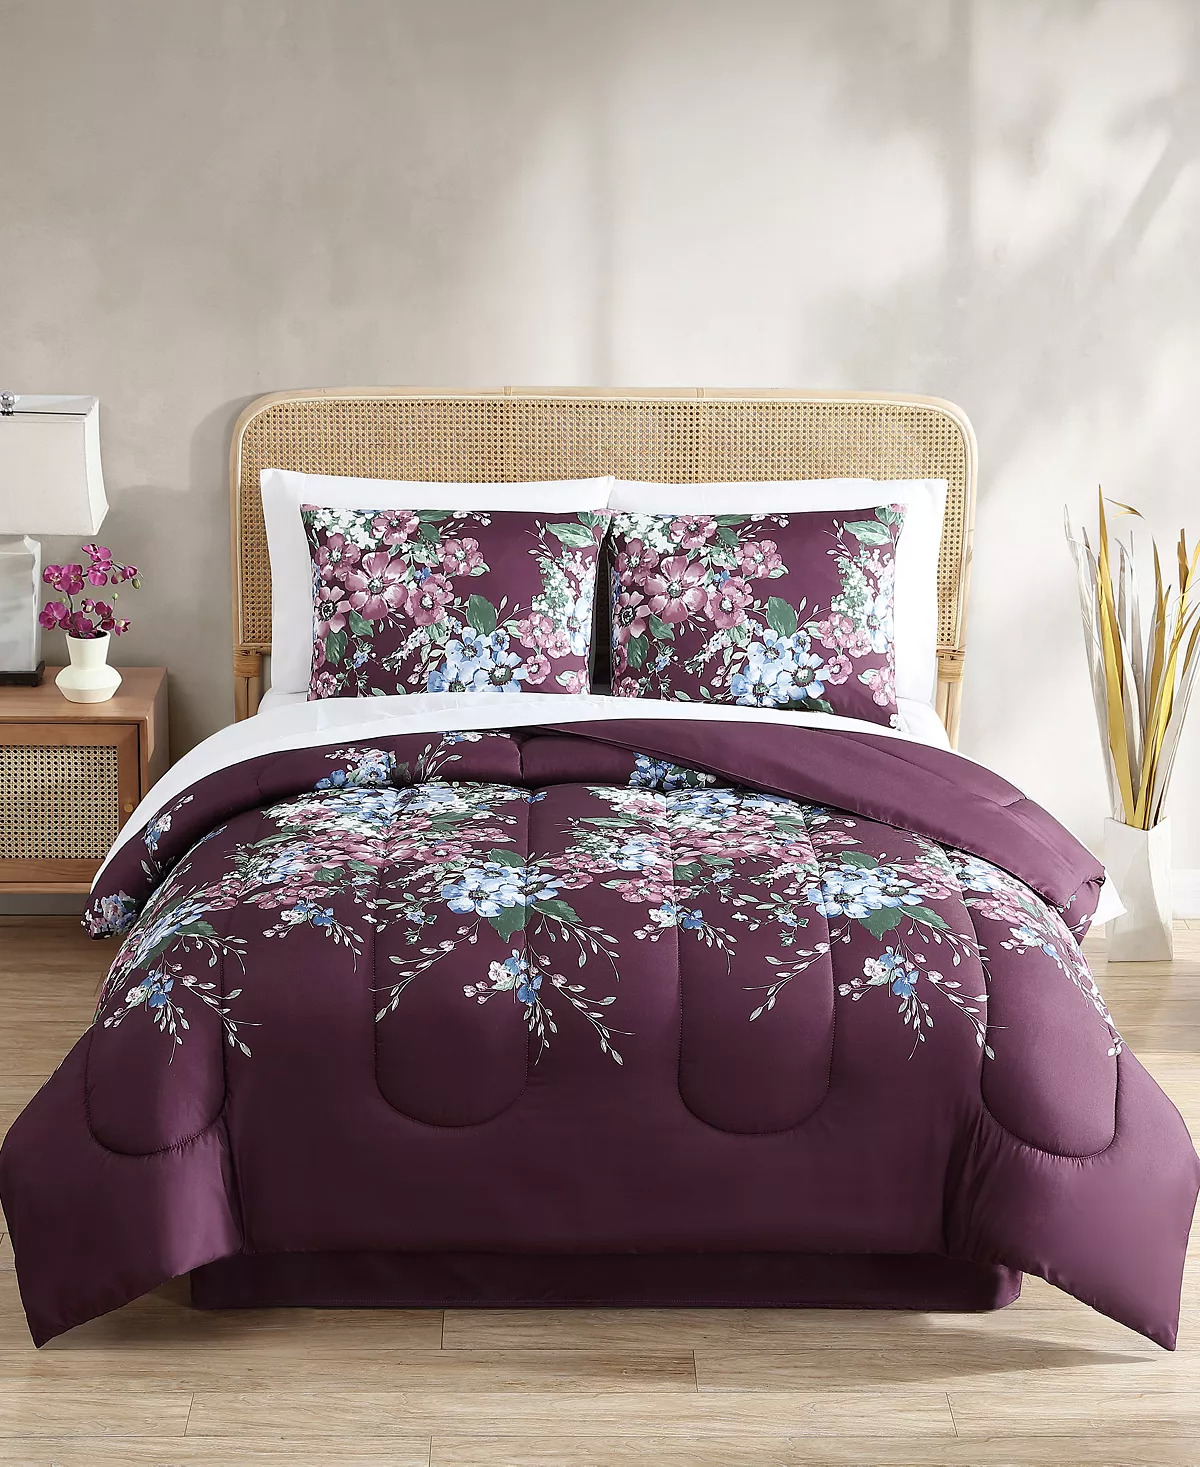 8-Piece Comforter Sets (Various Sizes): Hallmart Collectibles Clarissa Reversible Set $29.99, Keeco Douglas Stripe Set $29.99 & More + Free Store Pickup at Macy's or F/S on $25+